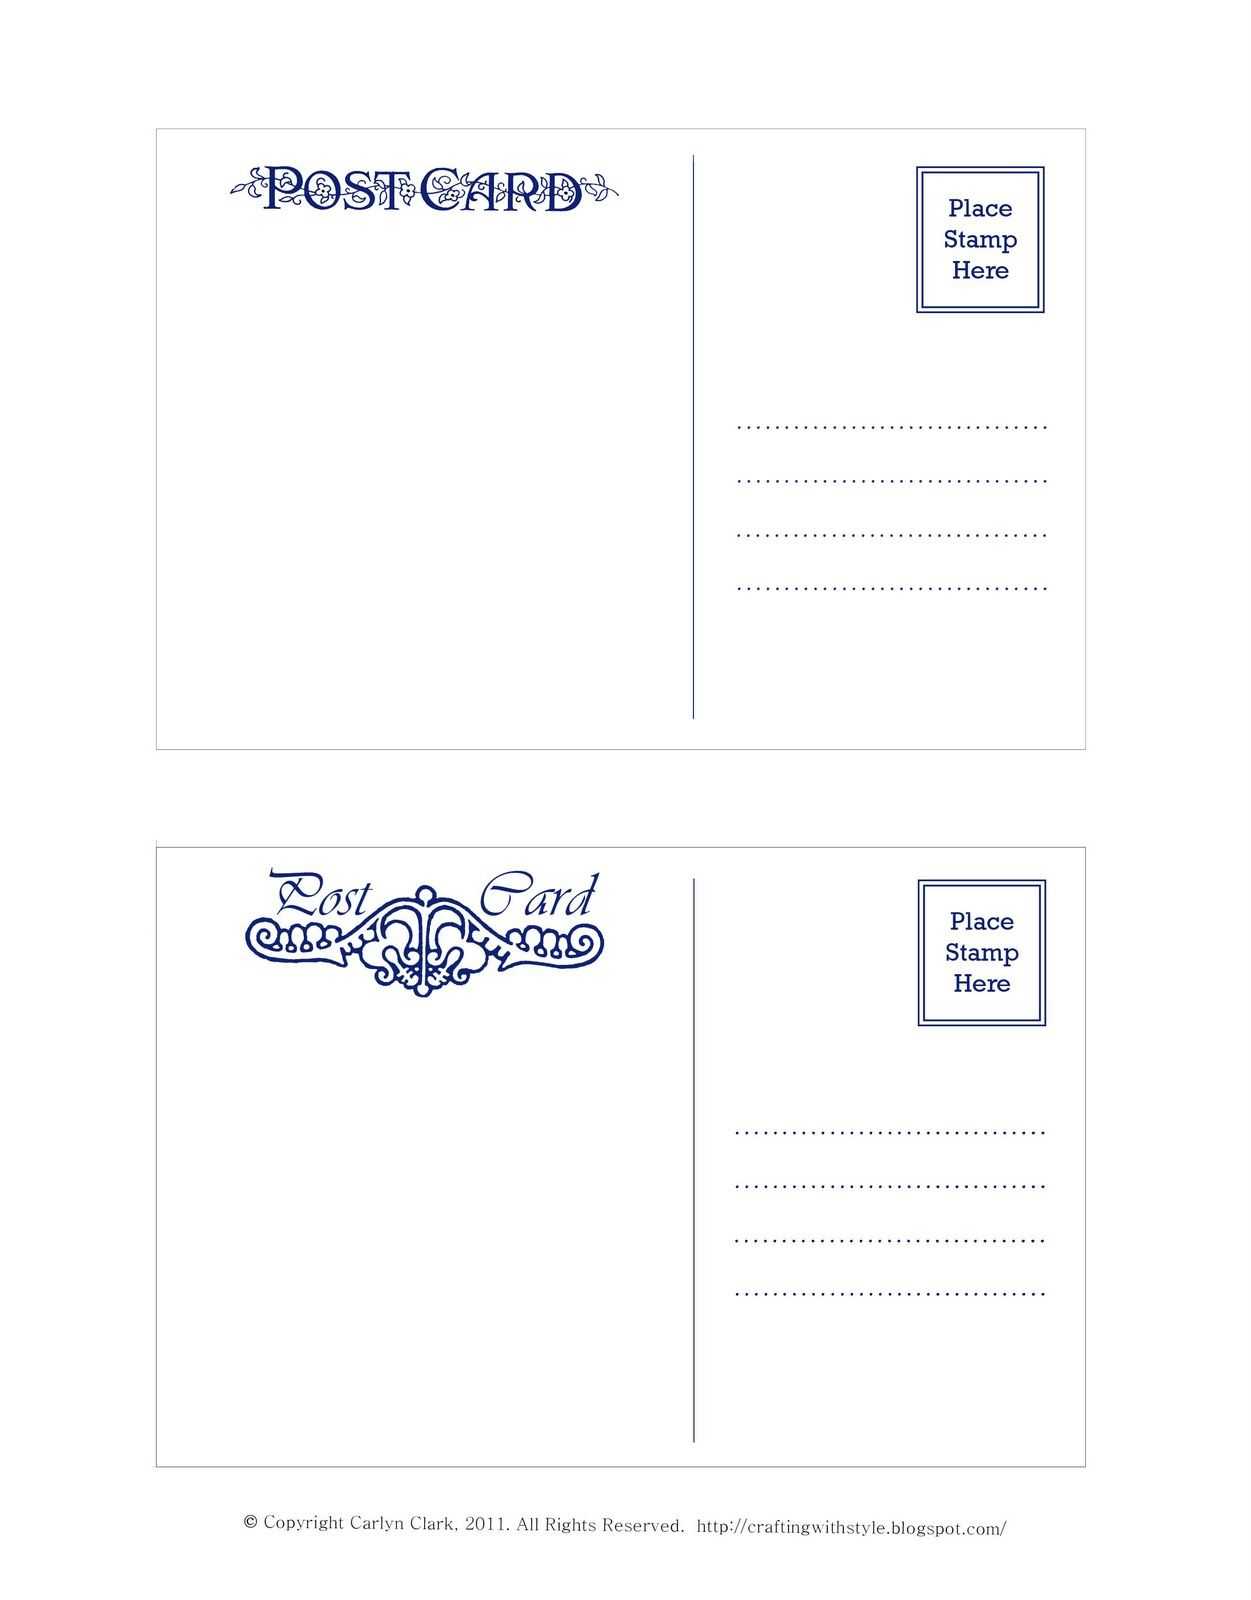 Crafting With Style: Free Postcard Templates | Postcards With Regard To Post Cards Template